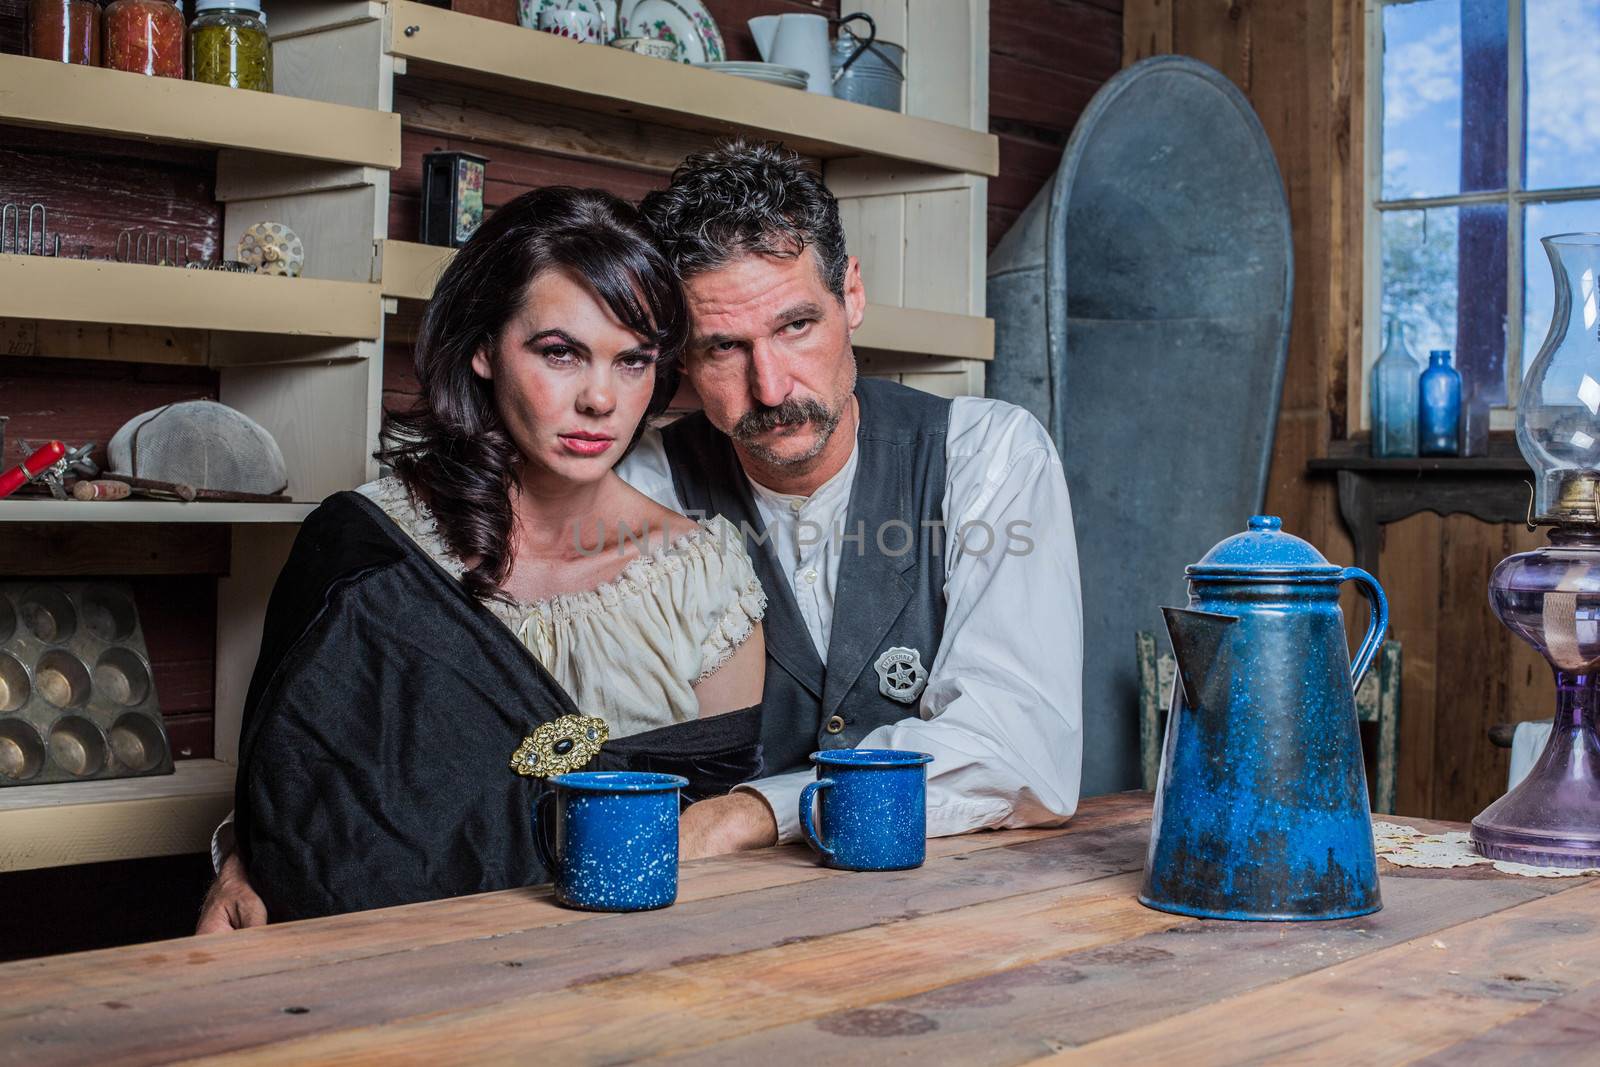 Serious looking western sheriff and woman pose inside of a house